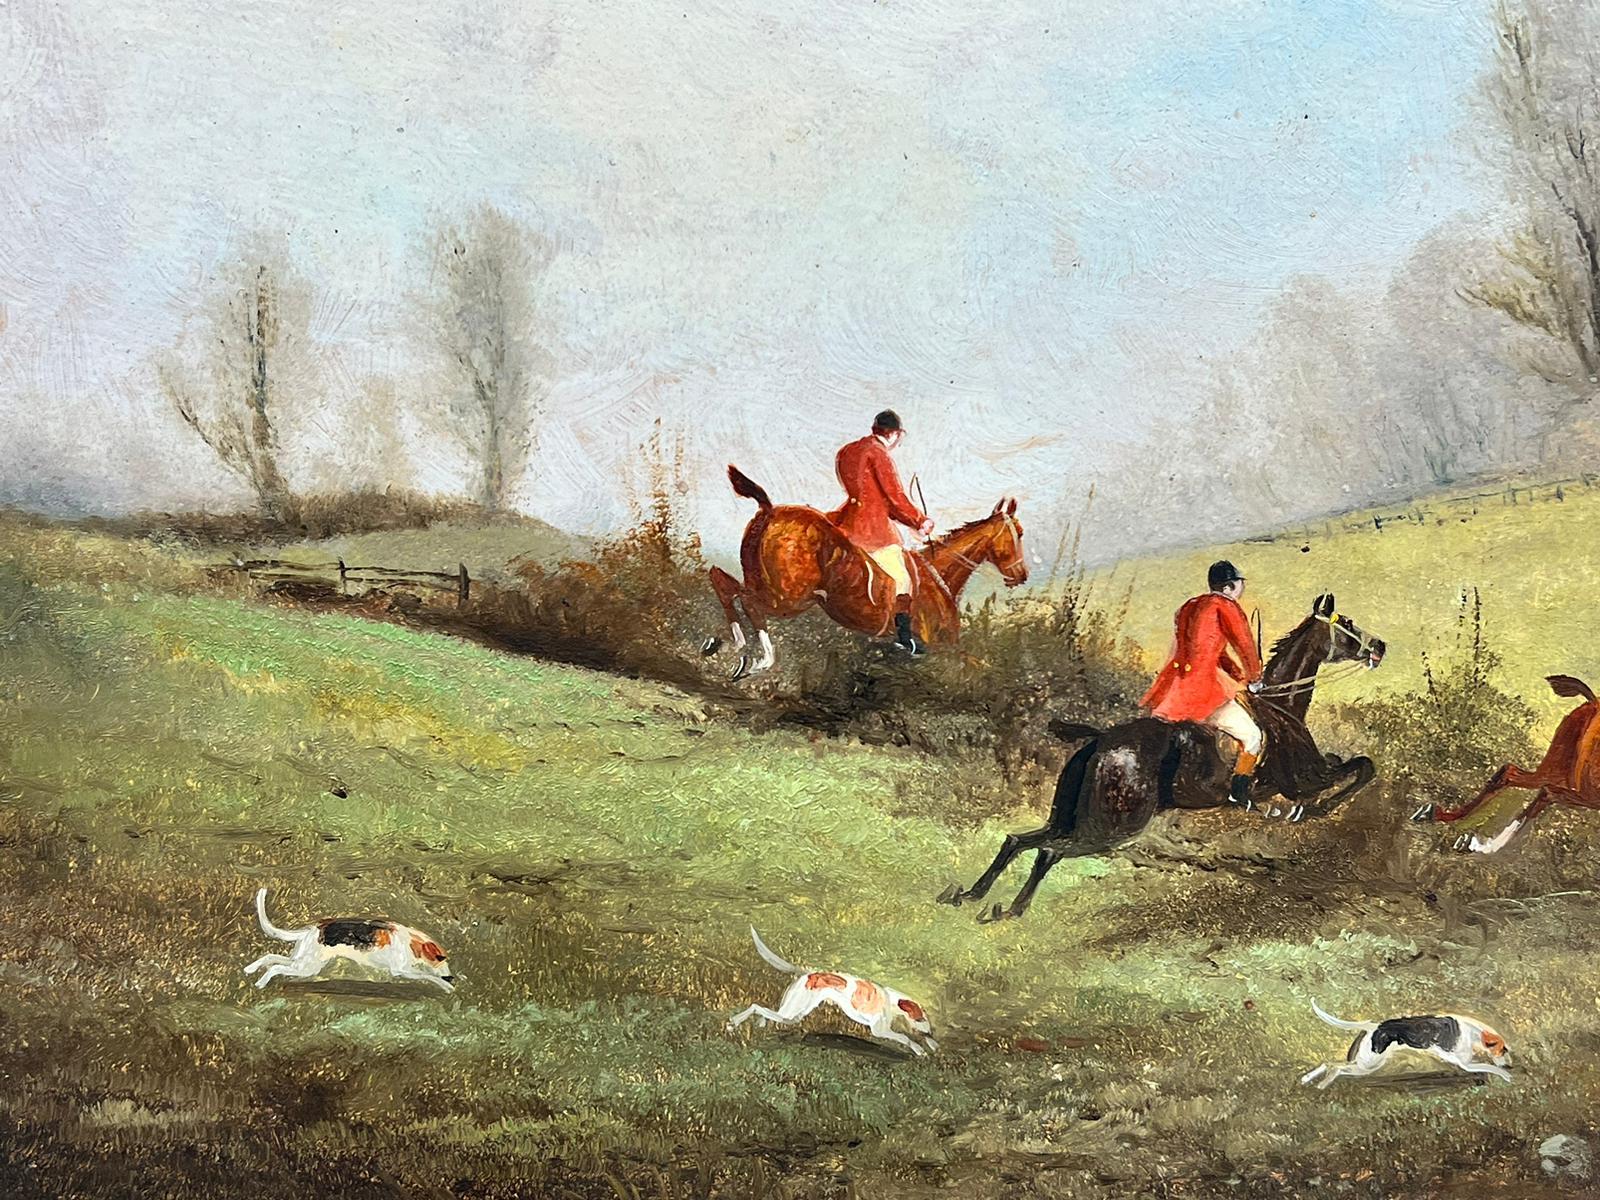 Superb oil painting by the very popular English sporting artist, Philip Rideout (circa 1850-1920). 

signed oil on paper mounted in a frame
dated
framed: 14 x 18 inches
paper: 8.25 x 12 inches

Rideout is one of Englands most popular sporting